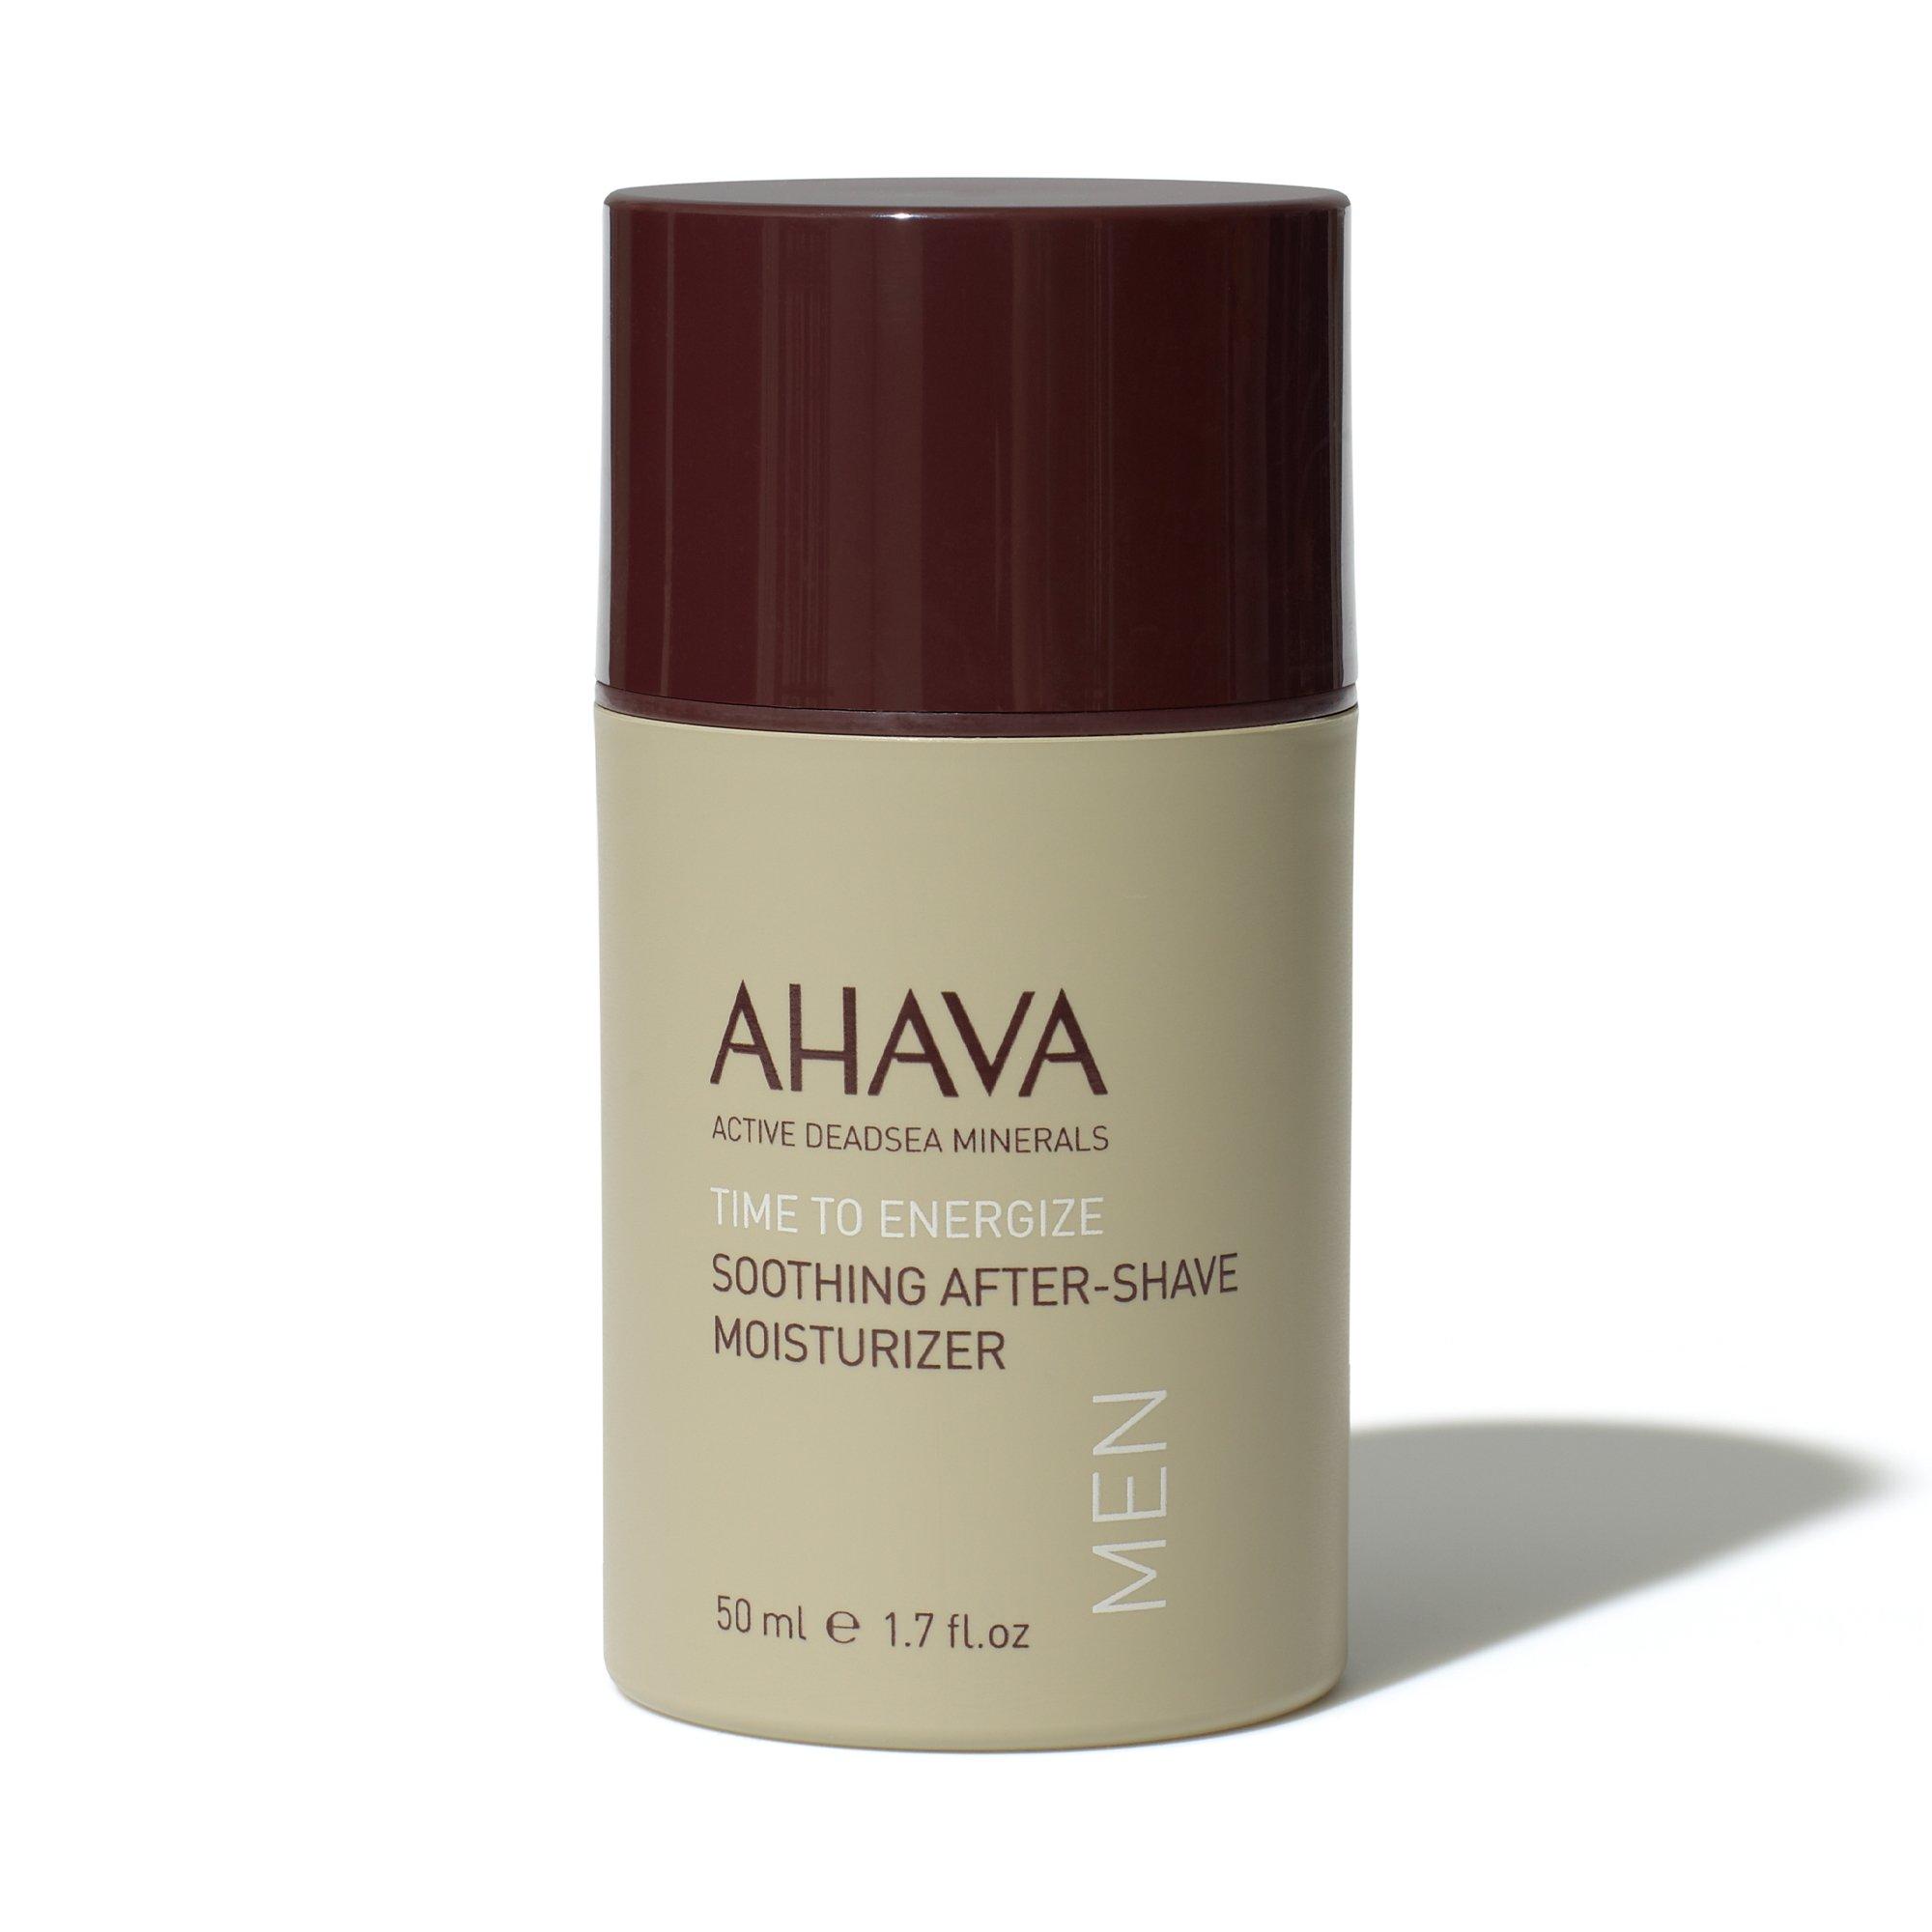 Image of AHAVA Soothing After-Shave Soothing After-Shave Moisturizer - 50ml